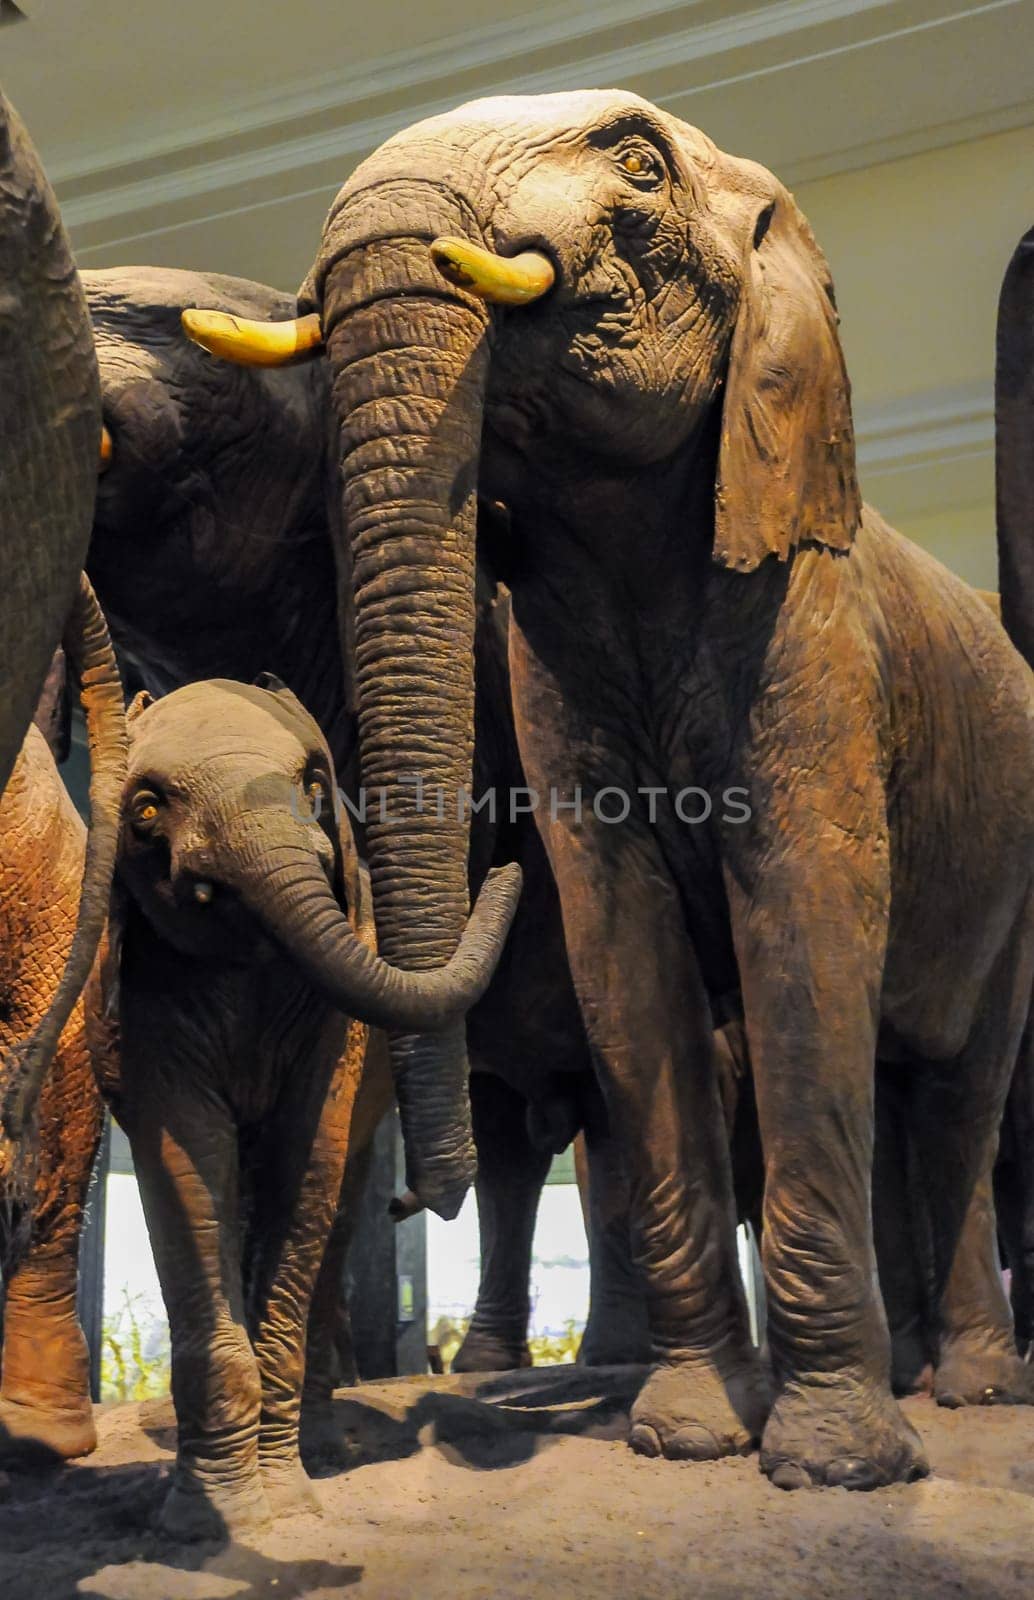 NEW YORK, USA - DECEMBER 05, 2011: Stuffed elephants on display at the Museum of National History, USA by Hydrobiolog